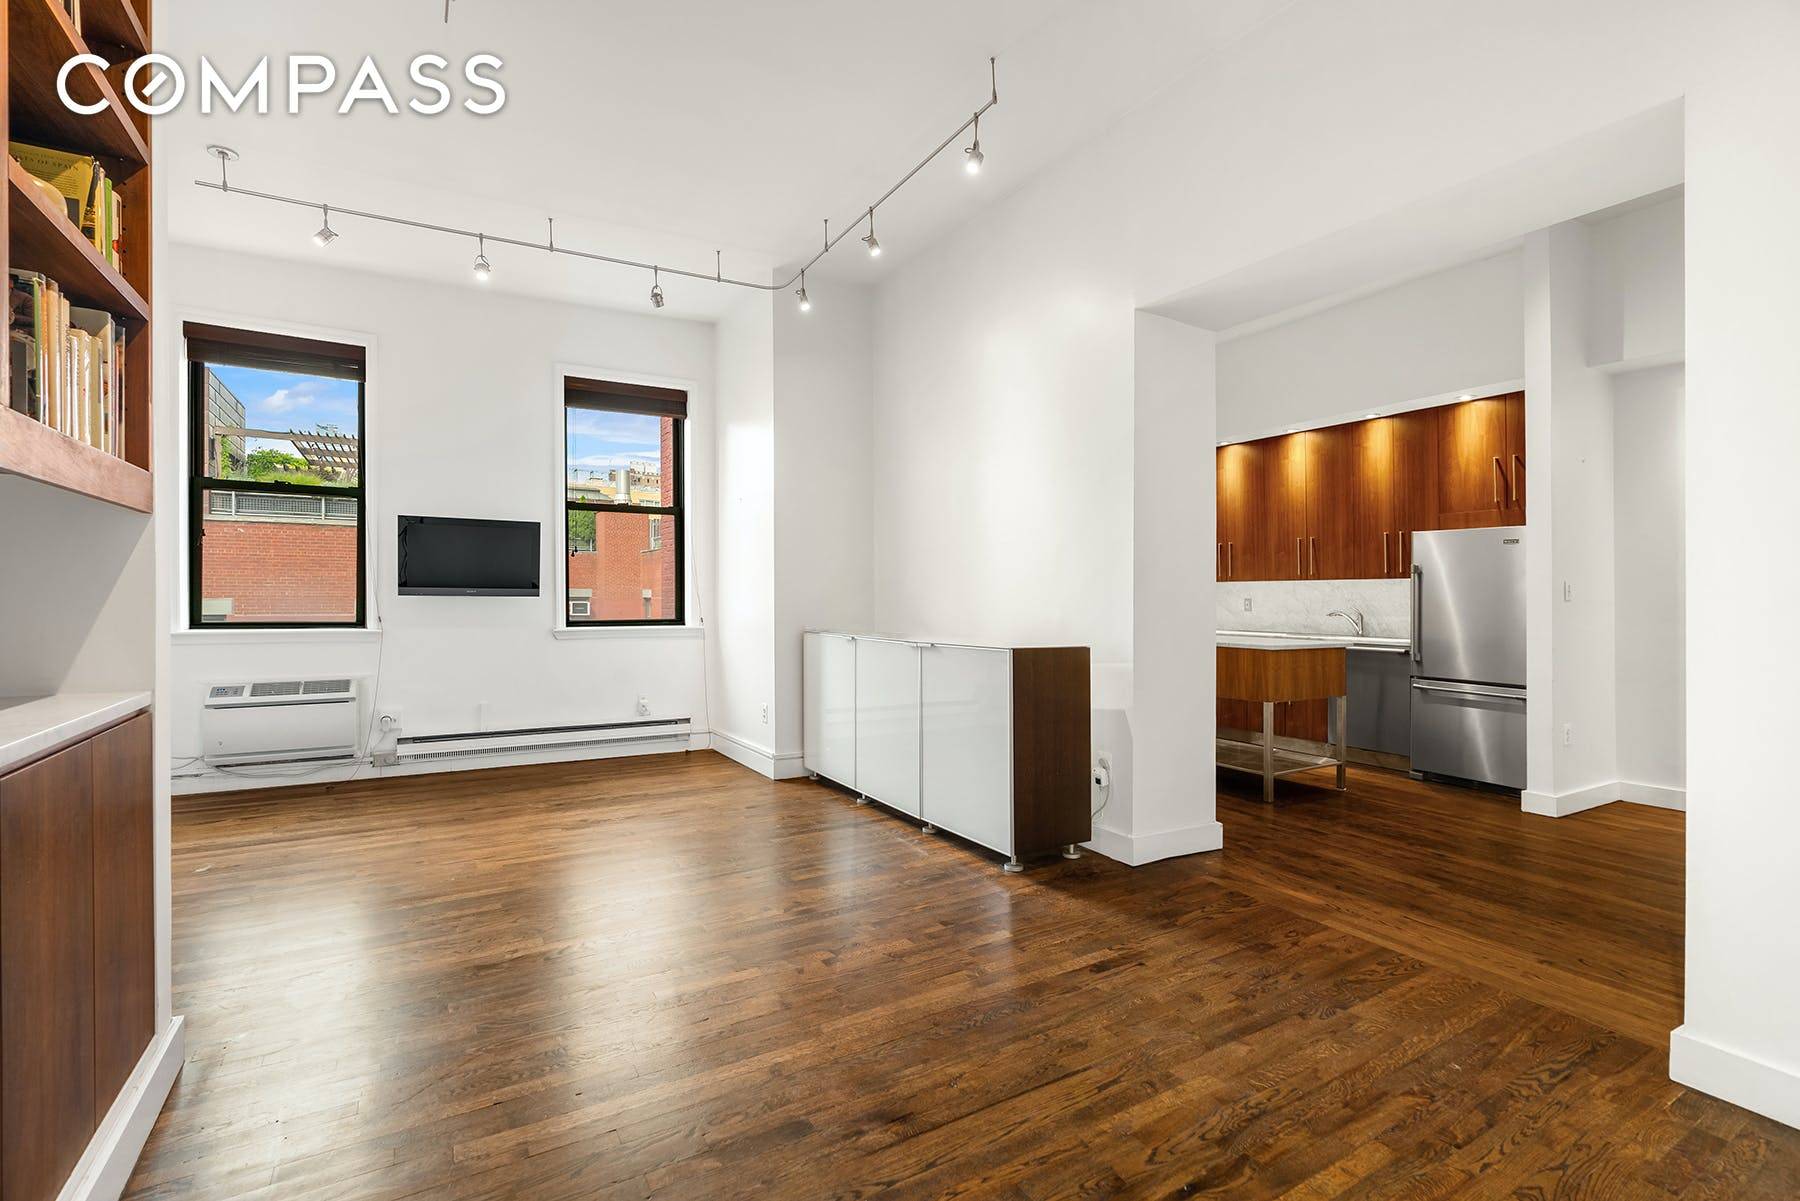 Expansive, fully renovated loft style one bedroom with two full baths on storied Waverly Place.